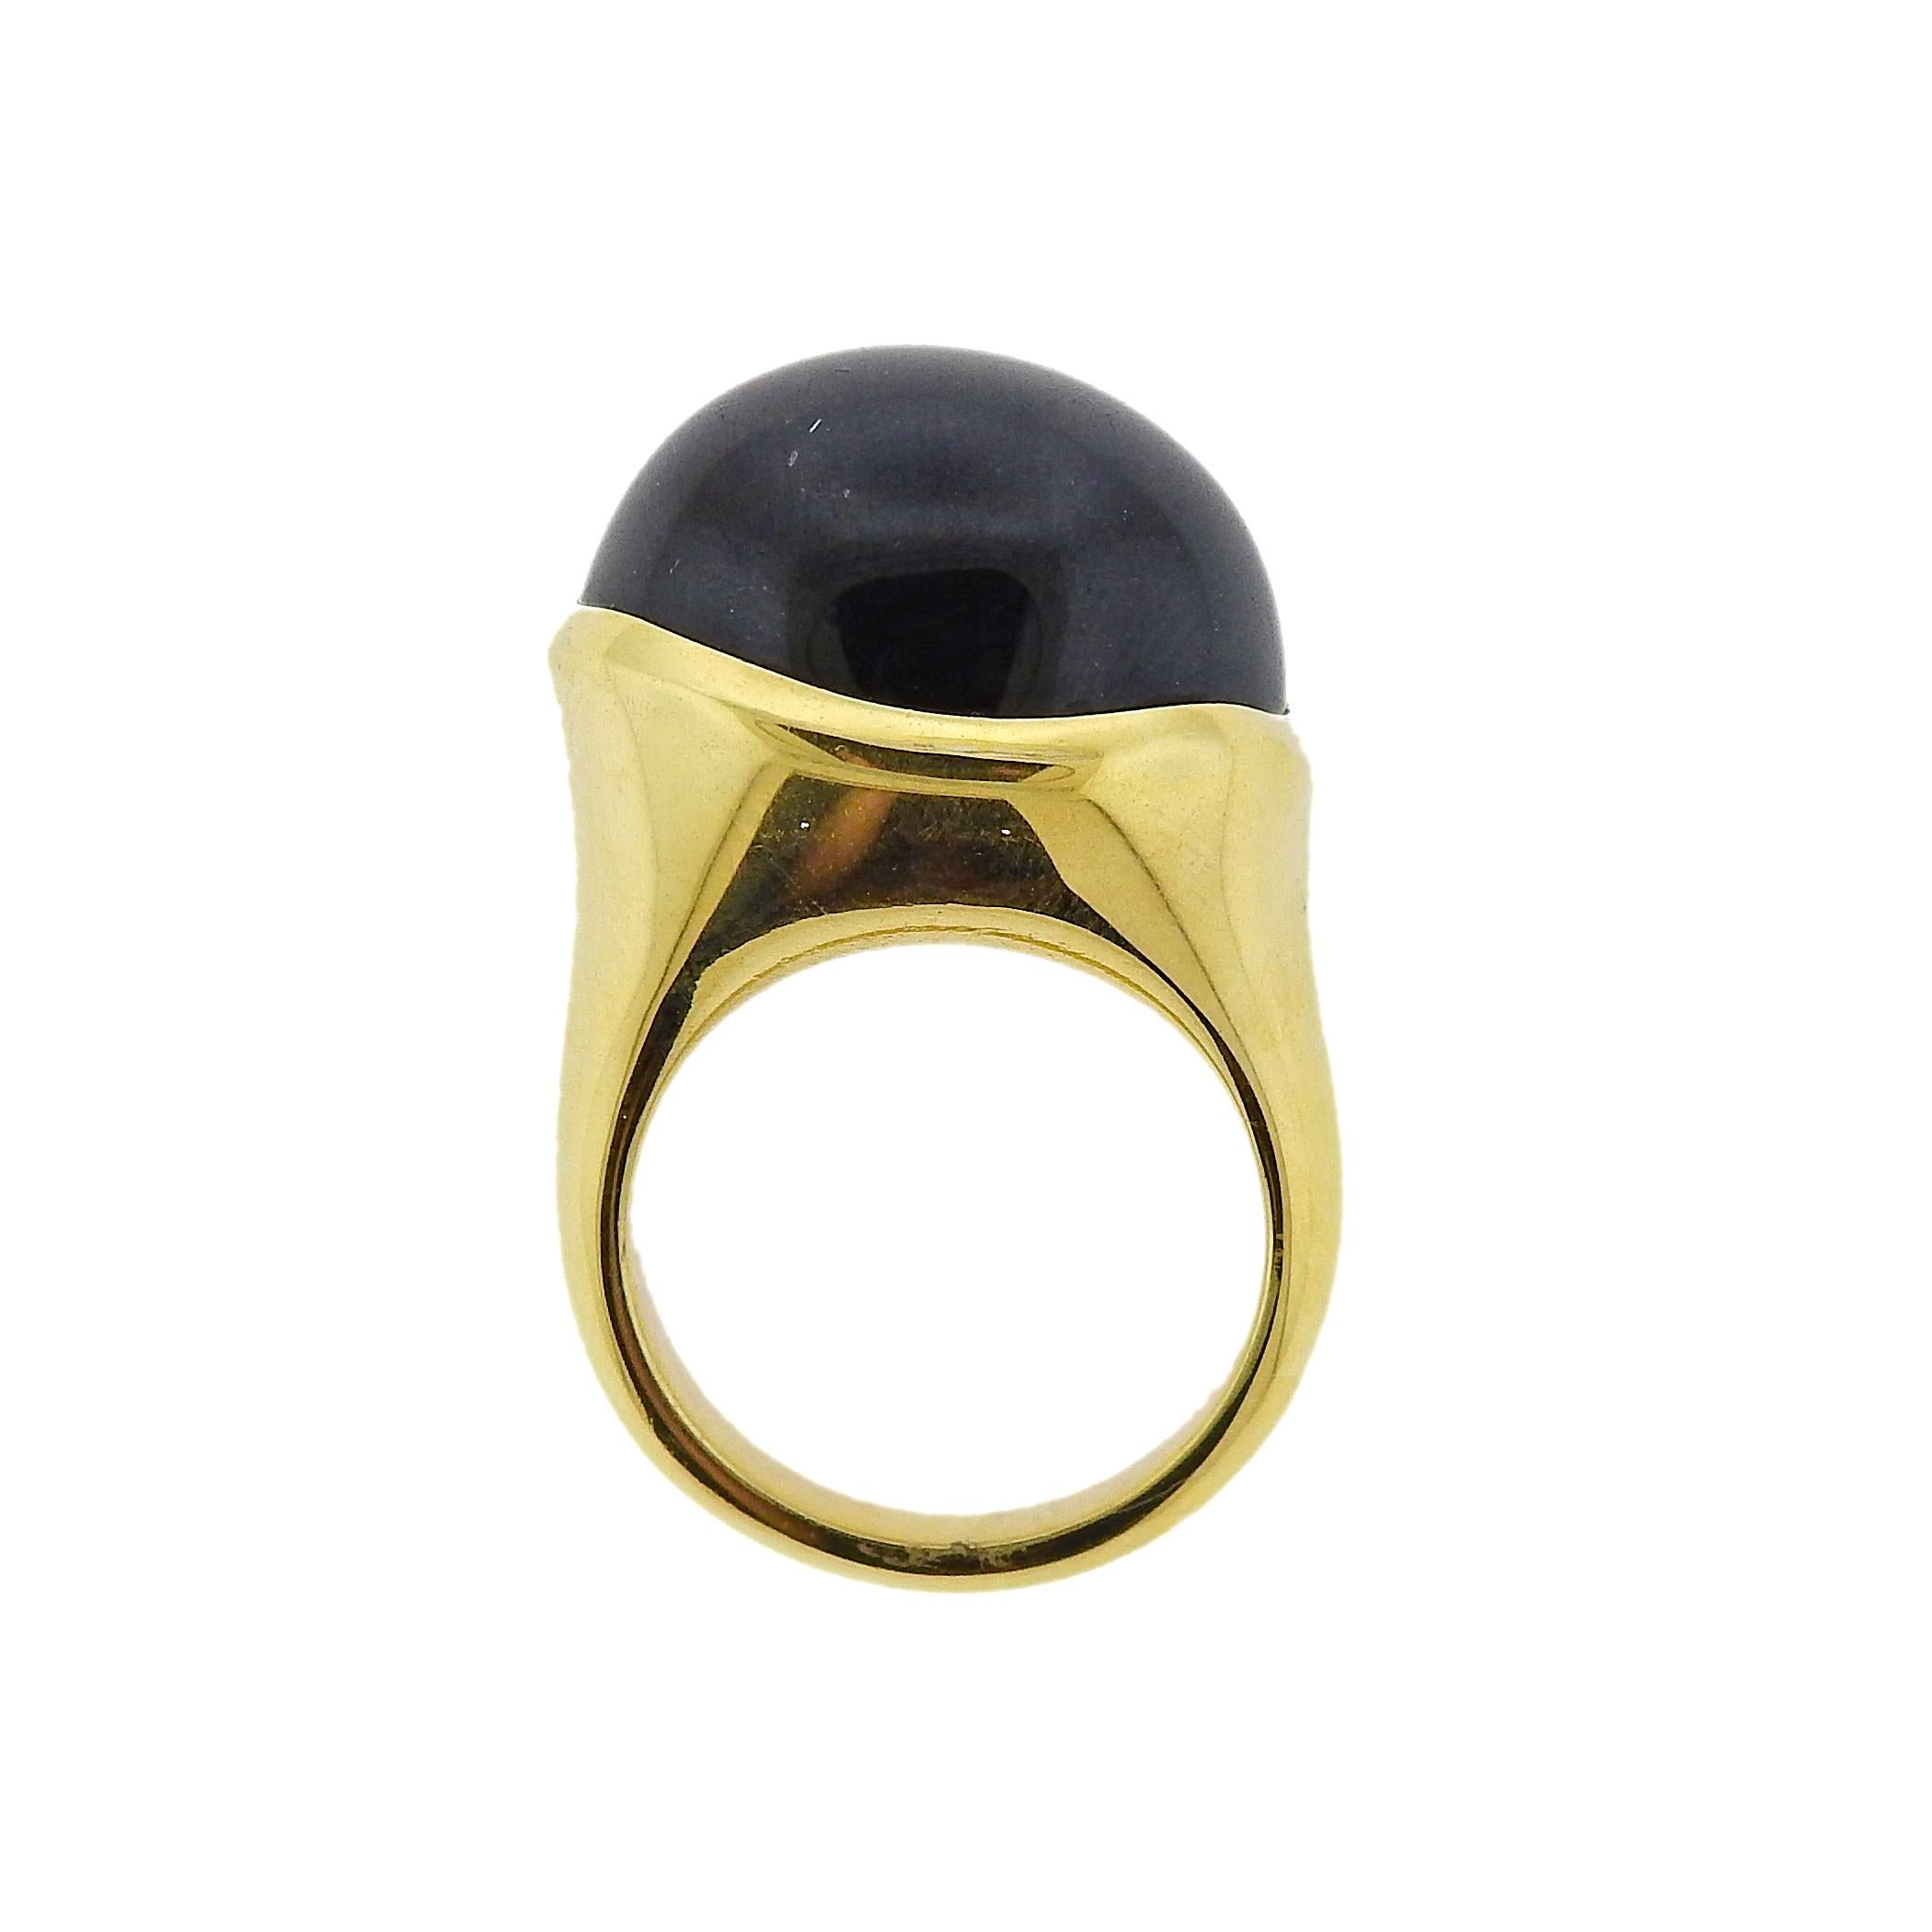 18k yellow gold ring by Elsa Peretti, designed for Tiffany & Co, set with black jade cabochon (16.7mm x 19.8mm). Ring size - 7, ring top - 18mm x 22mm. Weighs 18.6 grams. Marked: Tiffany & Co, Elsa Peretti, 750, Hong Kong.  